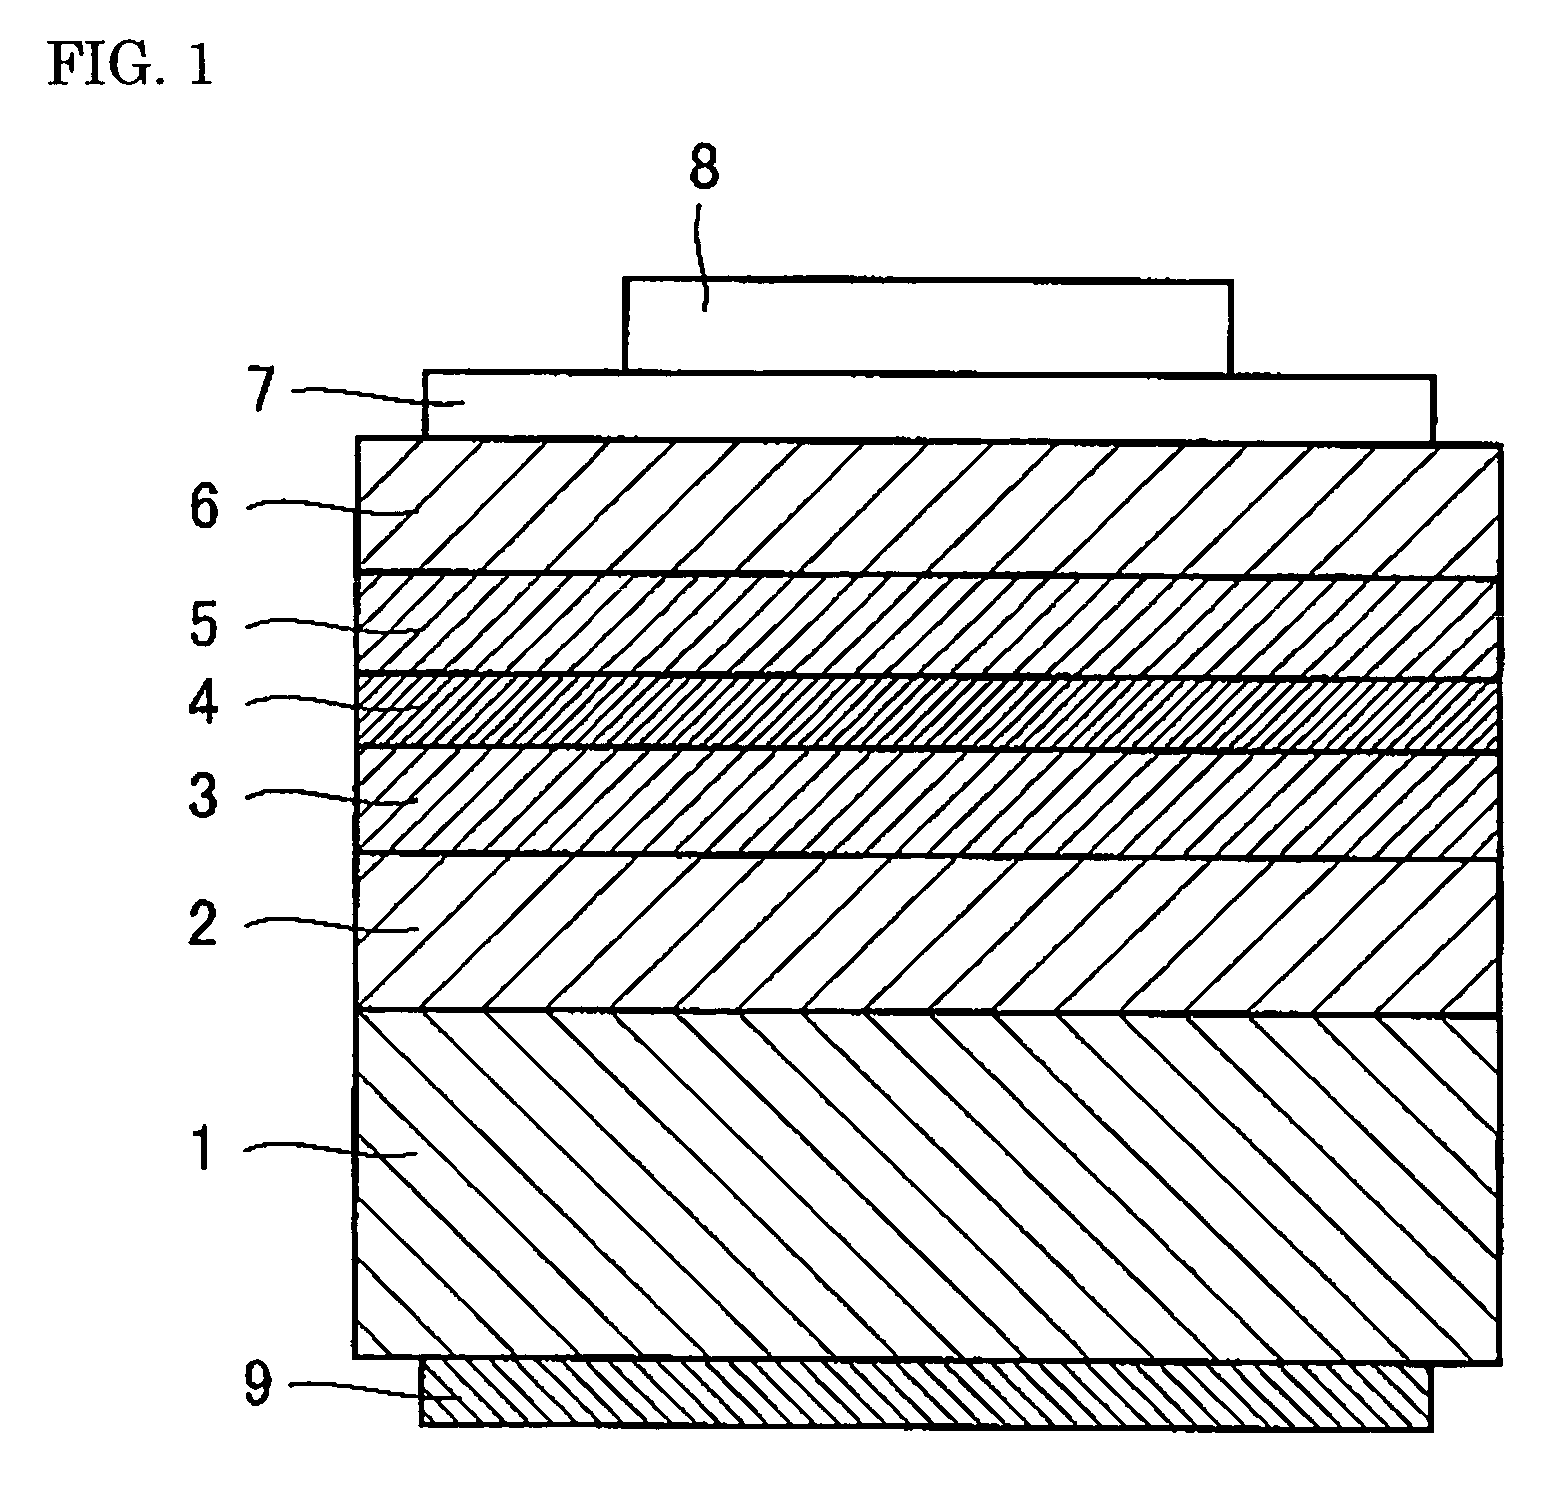 Nitride semiconductor devices and method of their manufacture